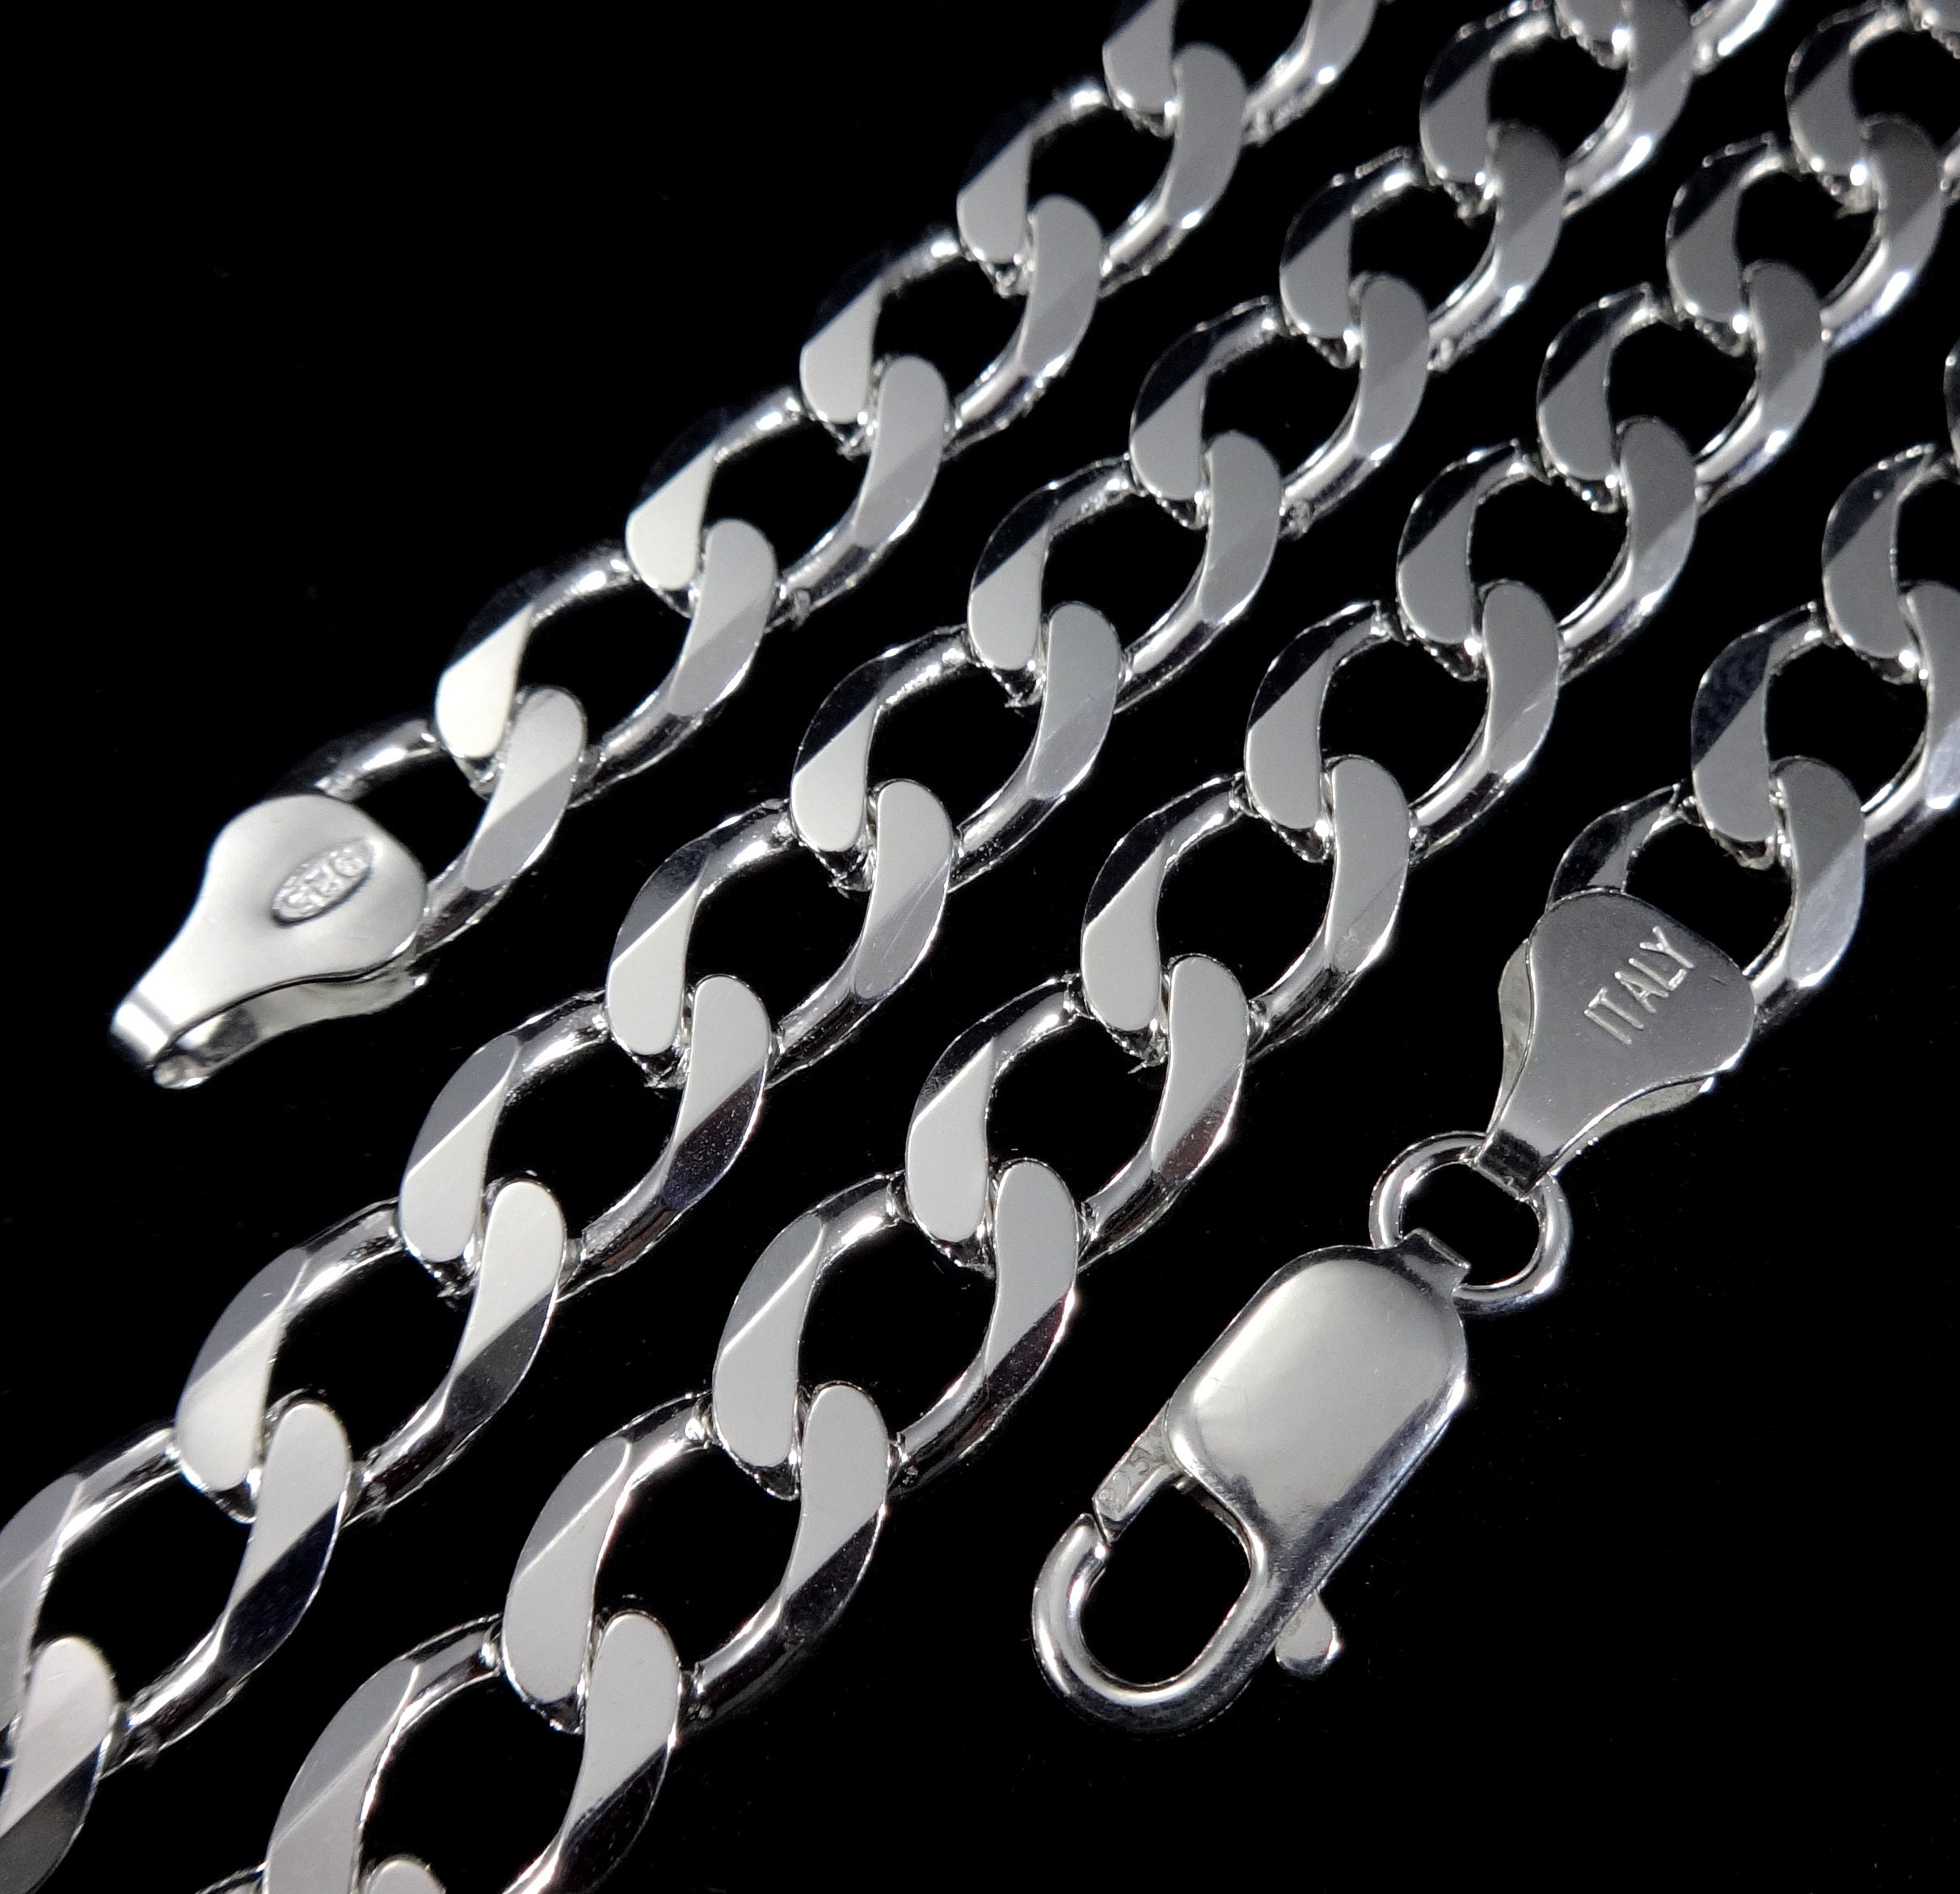 Jewelry Plus 6mm Mens Solid .925 Sterling Silver Cuban Link Curb Chain Necklace